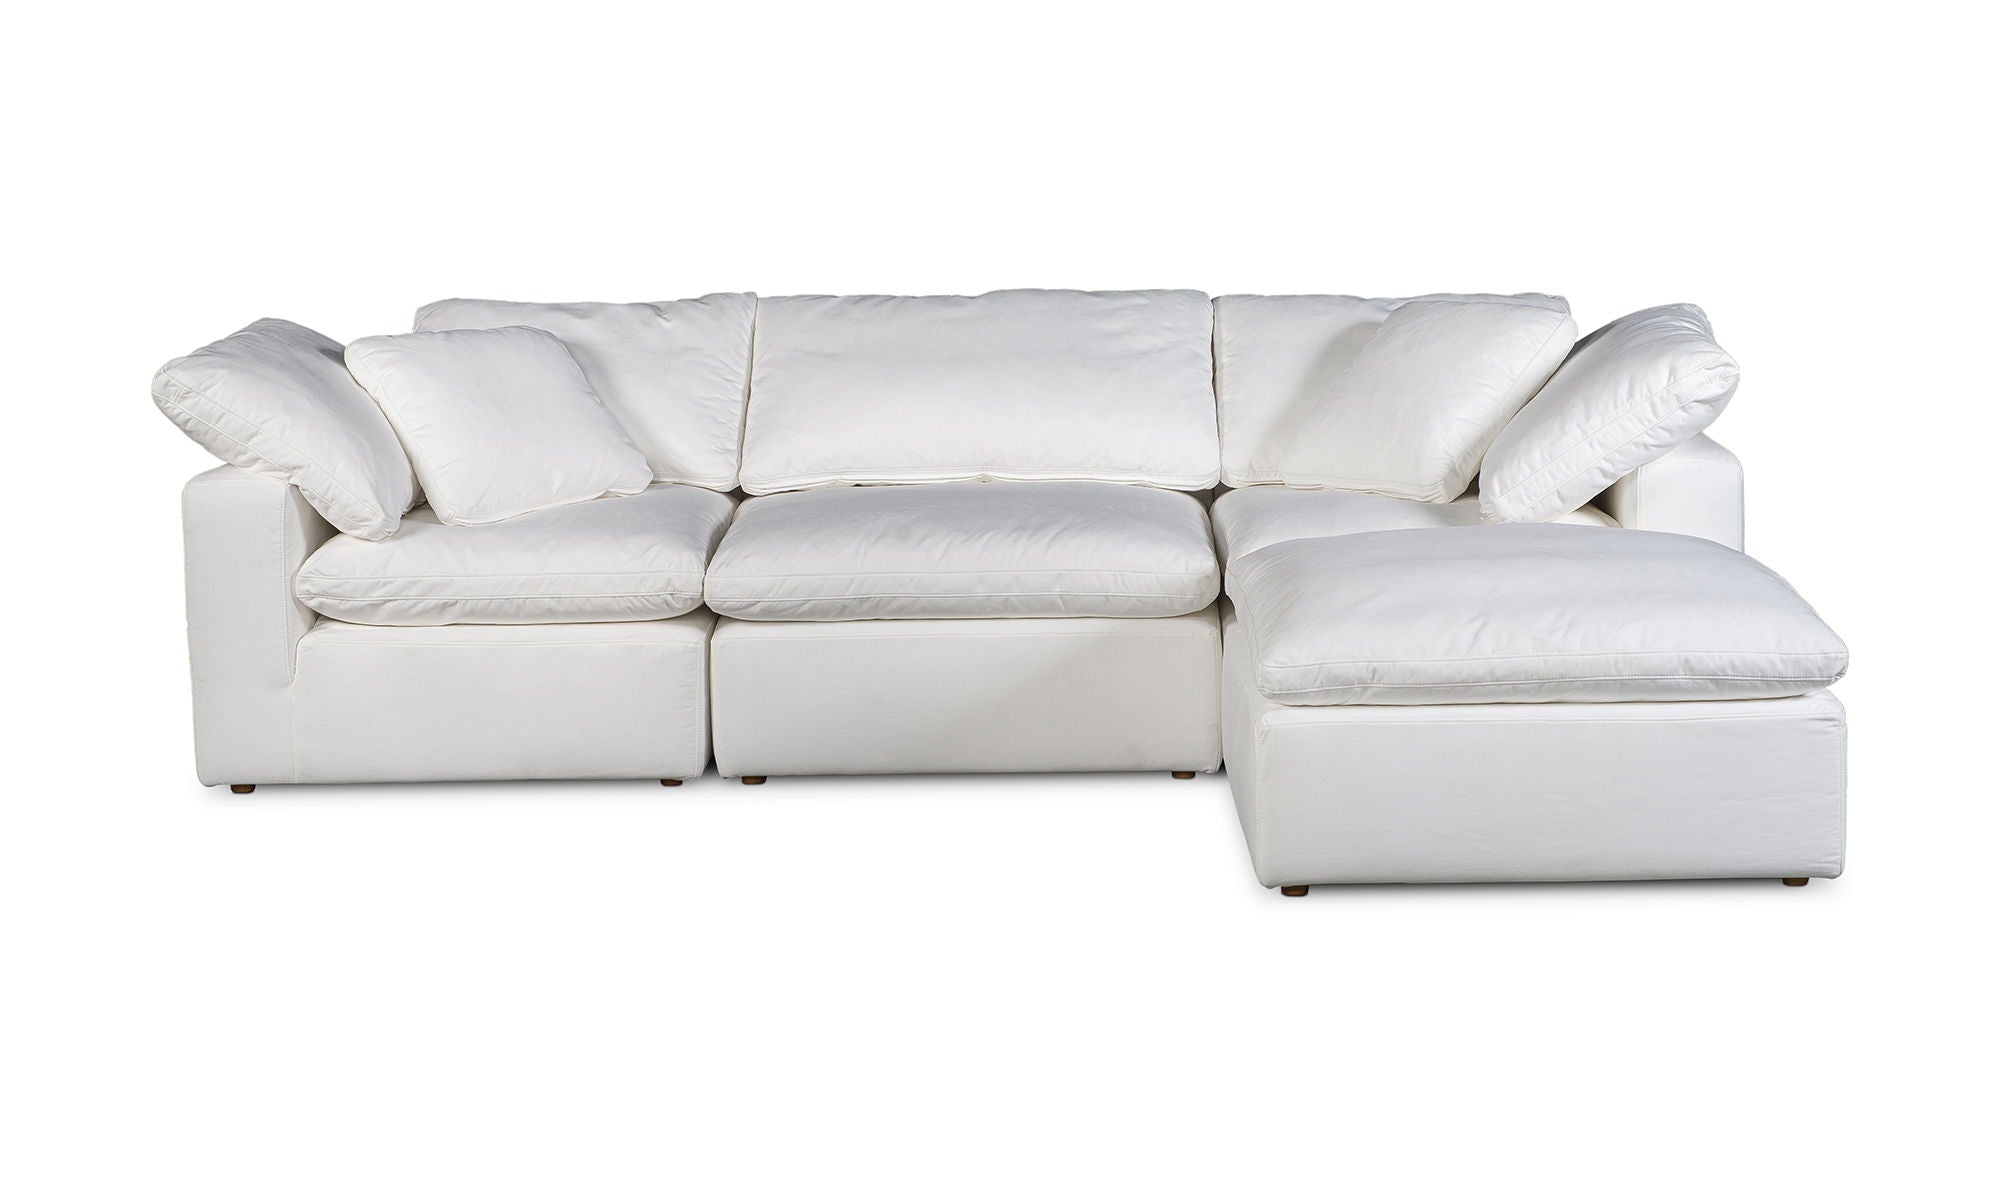 Clay Lounge Modular Sectional - LiveSmart Fabric - Cream White - Comfortable and Stylish Living Room Furniture-Stationary Sectionals-American Furniture Outlet